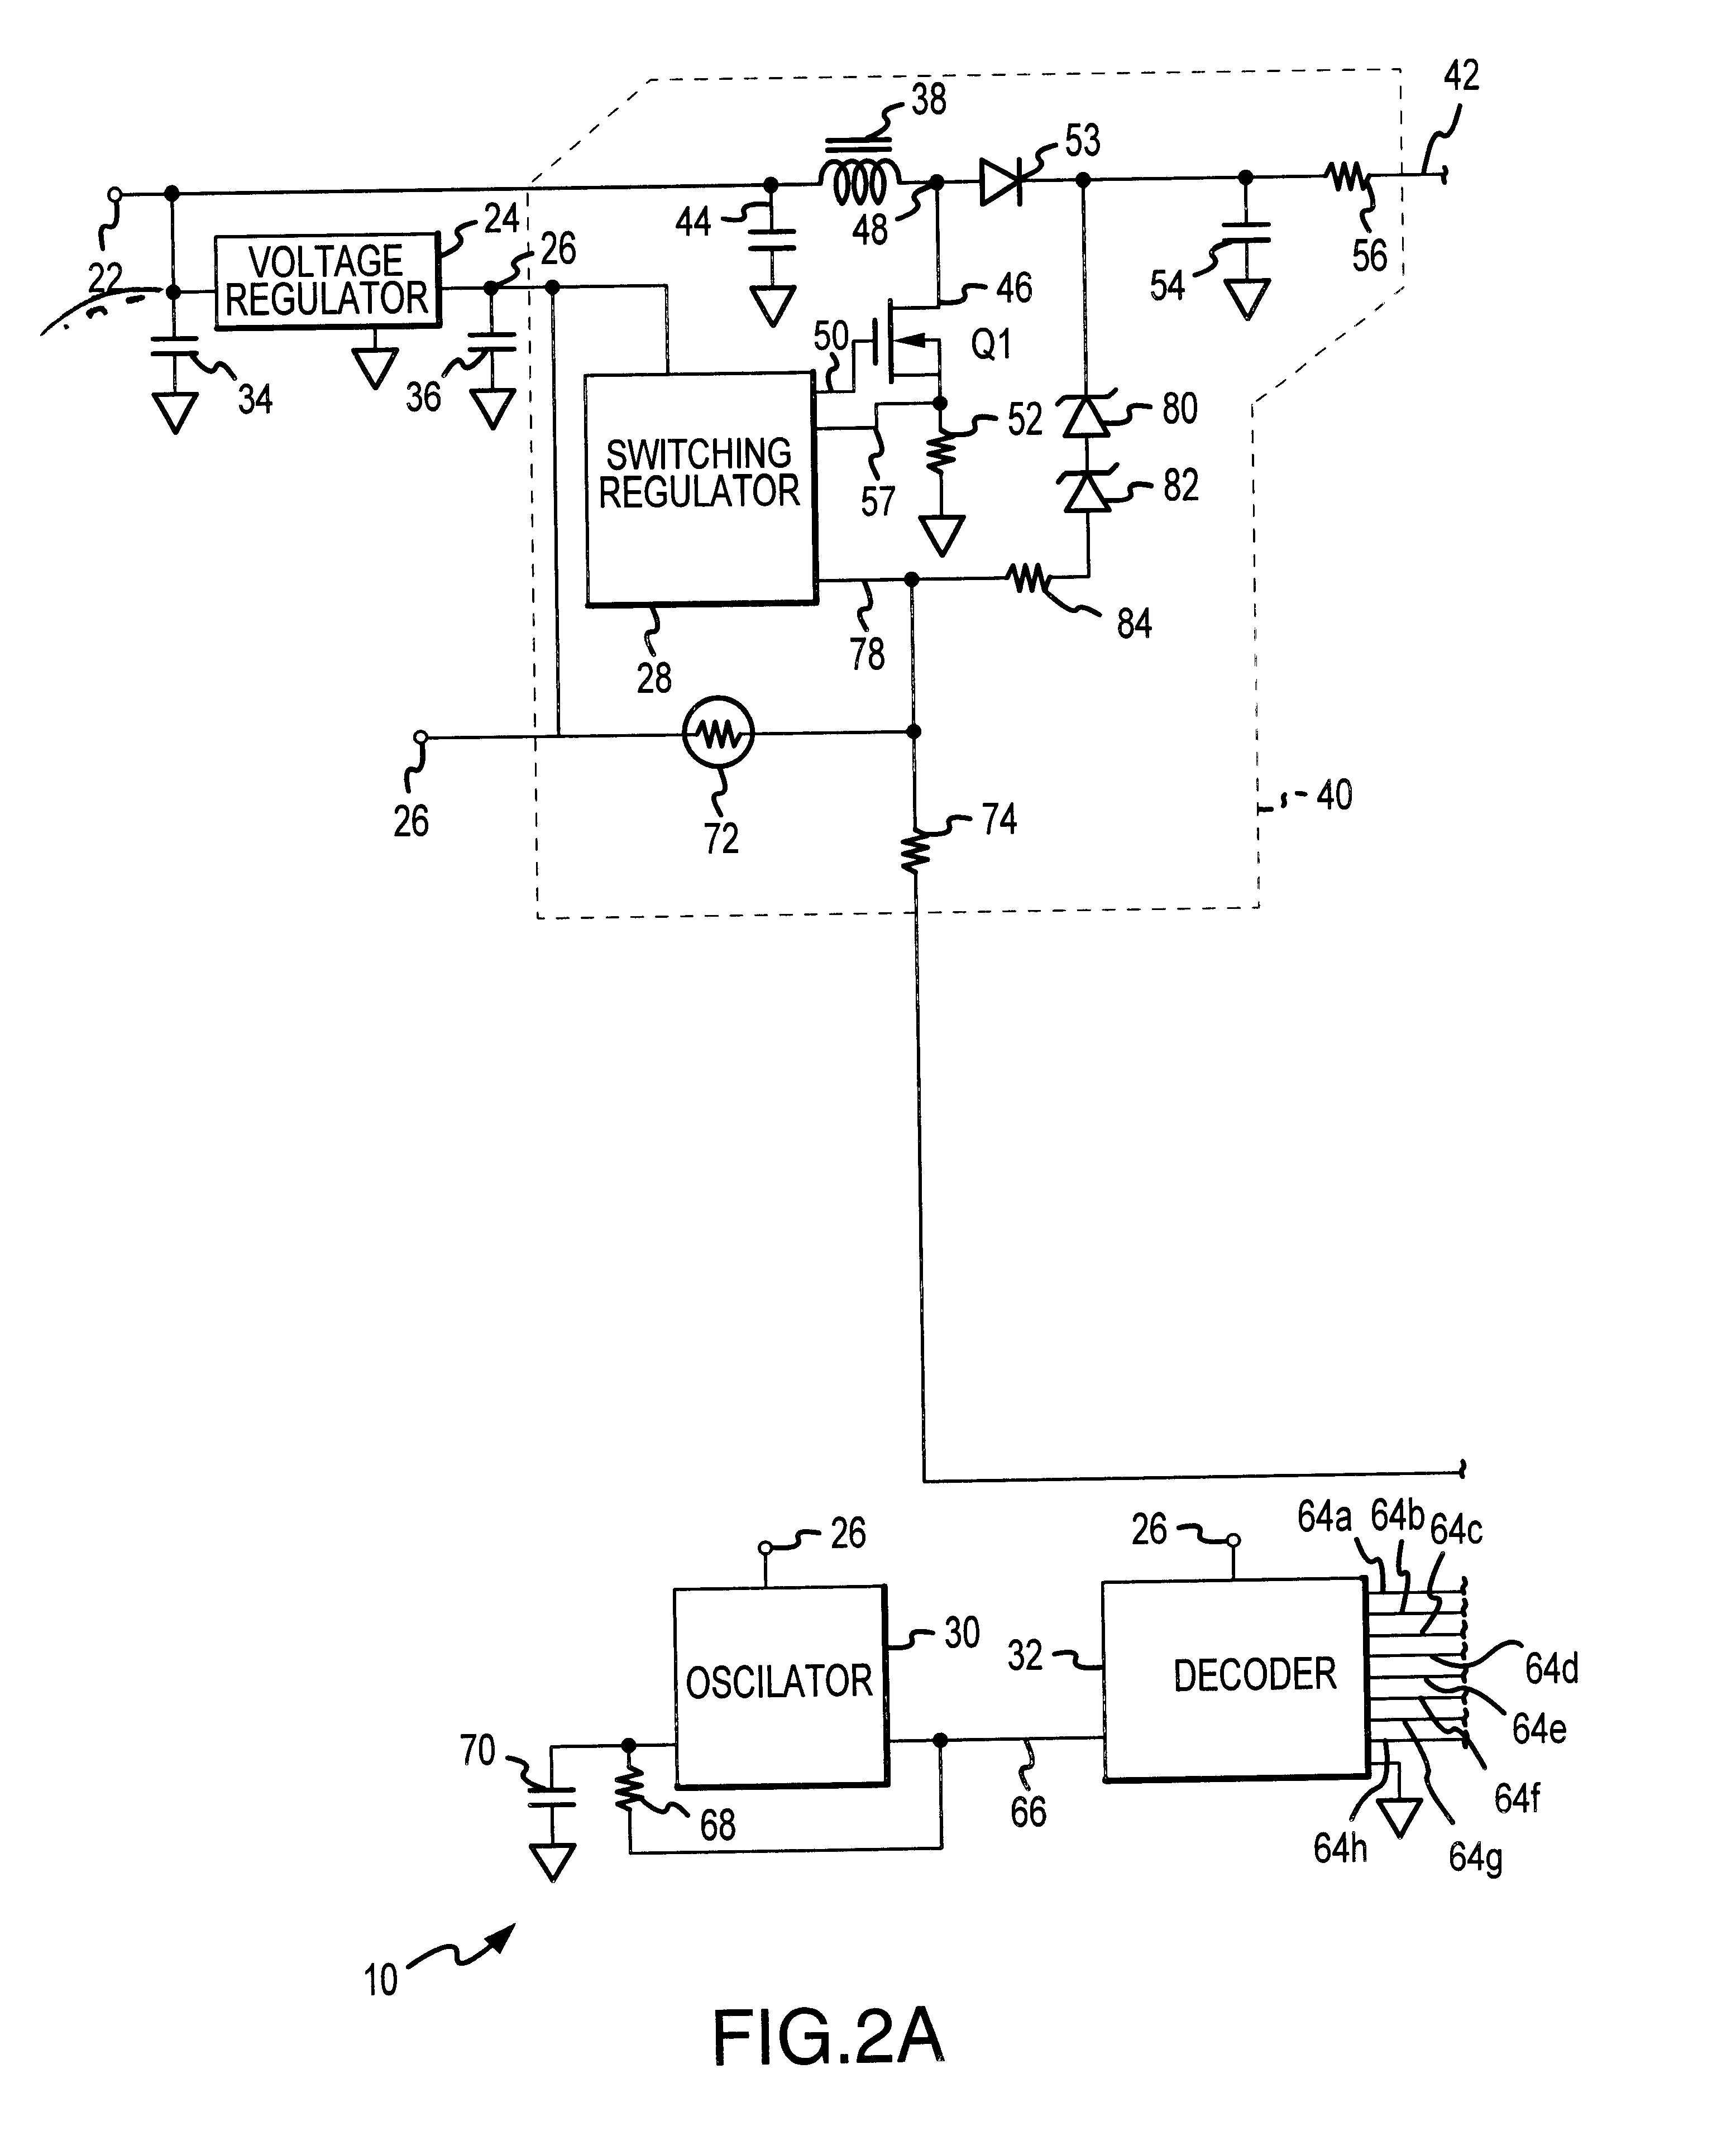 Low level light therapy method and apparatus with improved wavelength, temperature and voltage control